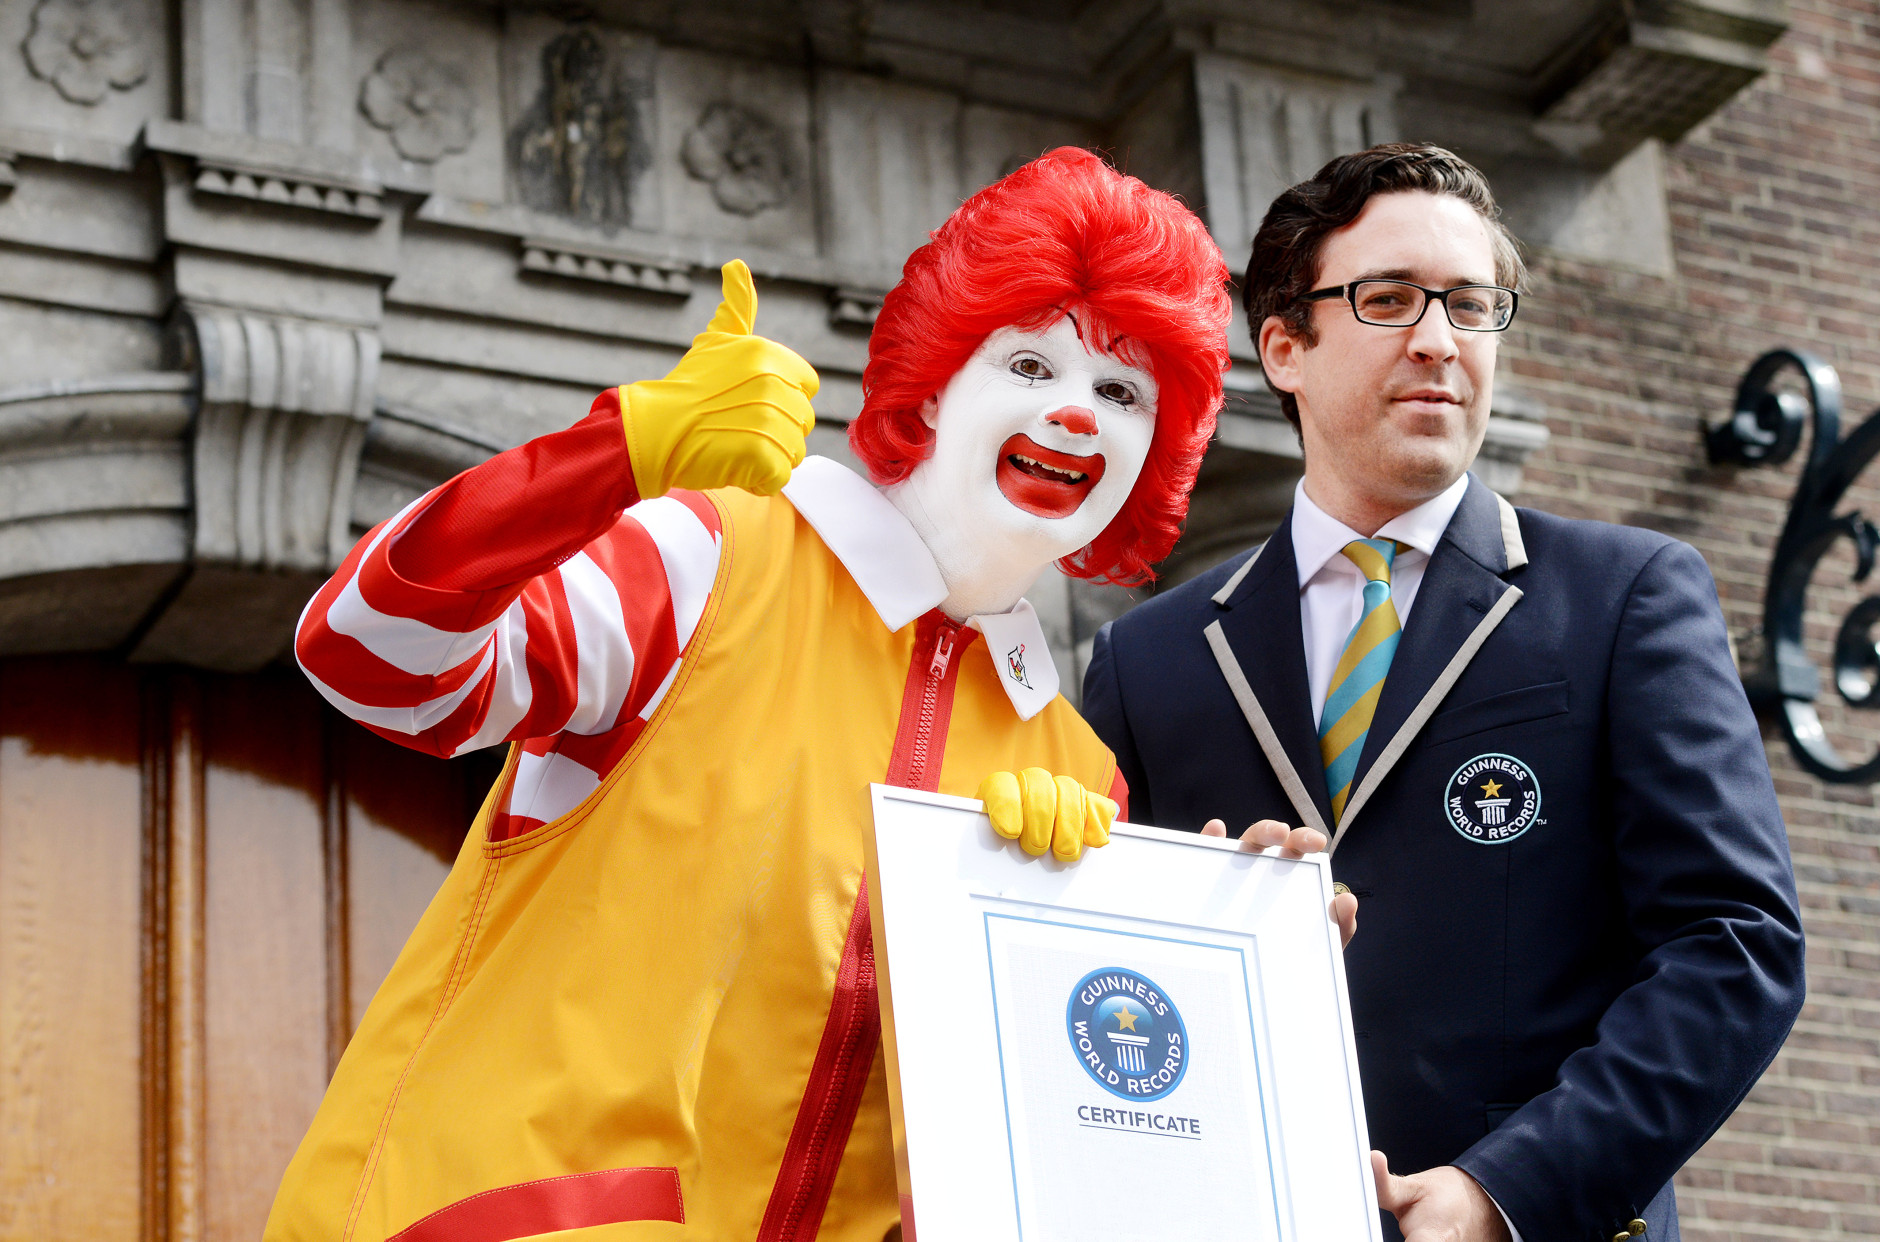 IMAGE DISTRIBUTED FOR MCDONALD'S - Jack Brockbank, Guinness World Records judge, is presented a certificate at the McDonald's and Guinness World Records event during Redhead Festival in Breda, The Netherlands on Sunday, Sept. 1, 2013. 1,672 redheads, accompanied by famous redhead Ronald McDonald, set the Guinness World Record for the largest gathering of redheads at the 2013 Redhead Days Festival. More than 5,000 redheads attended the global event from 80 countries. Throughout the weekend, Ronald McDonald served as the Redhead Days official ambassador by delivering smiles to many people.  McDonalds is making a $1 donation to Ronald McDonald House Charities (up to $10,000 USD) for every person who changes their Facebook or Twitter profile picture using www.mcdonalds.com/mcdsmiles, #mcdsmiles. (Patrick Post/AP Images for McDonald's)